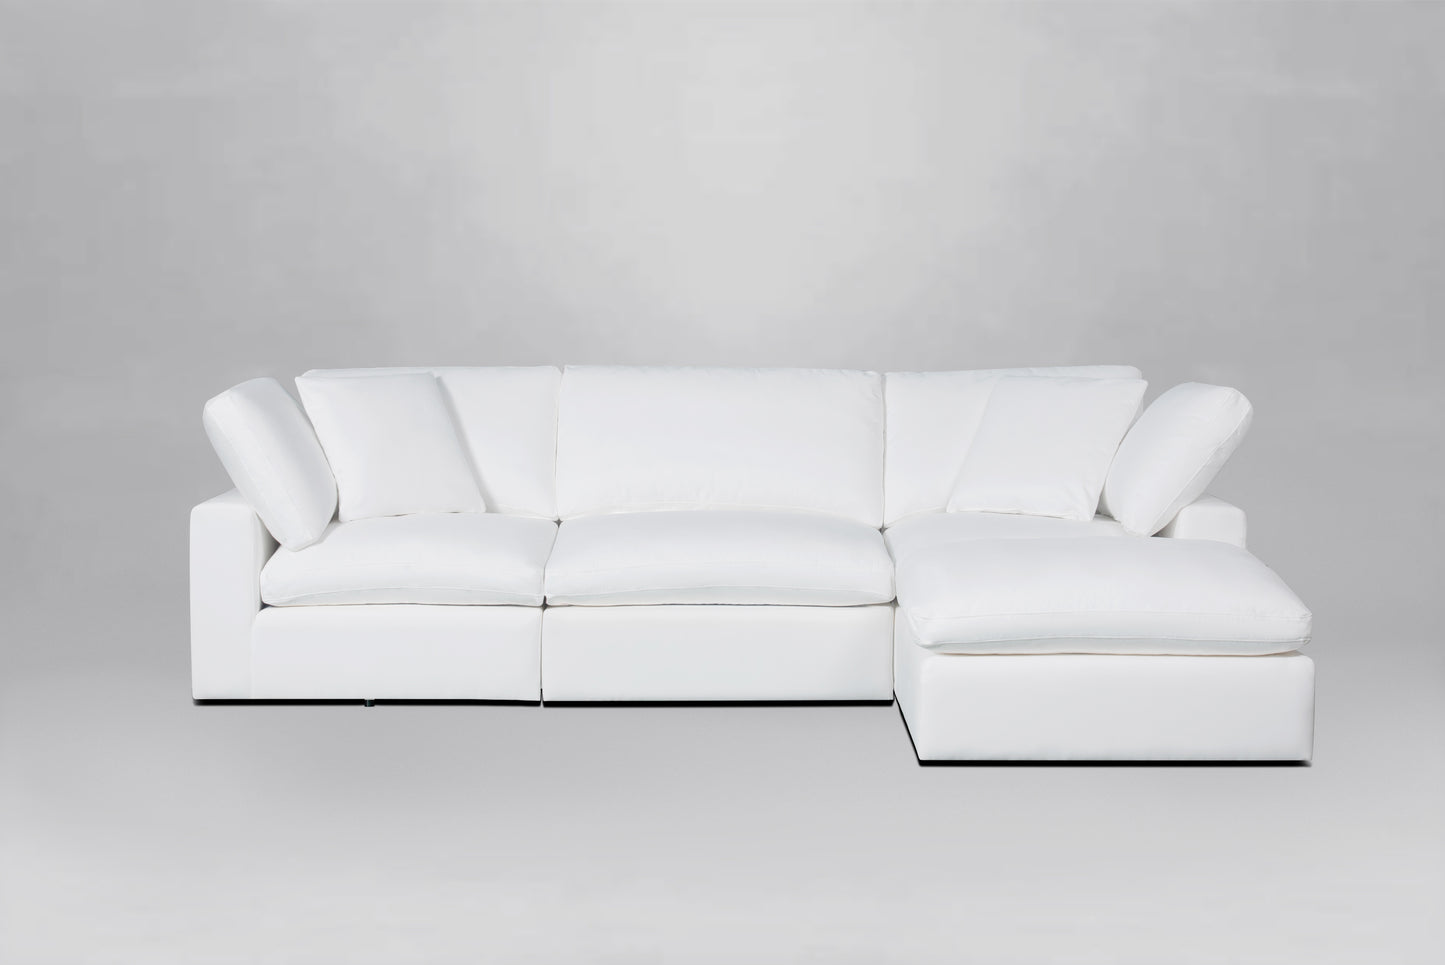 Classic White 4-Piece Modular Sectional